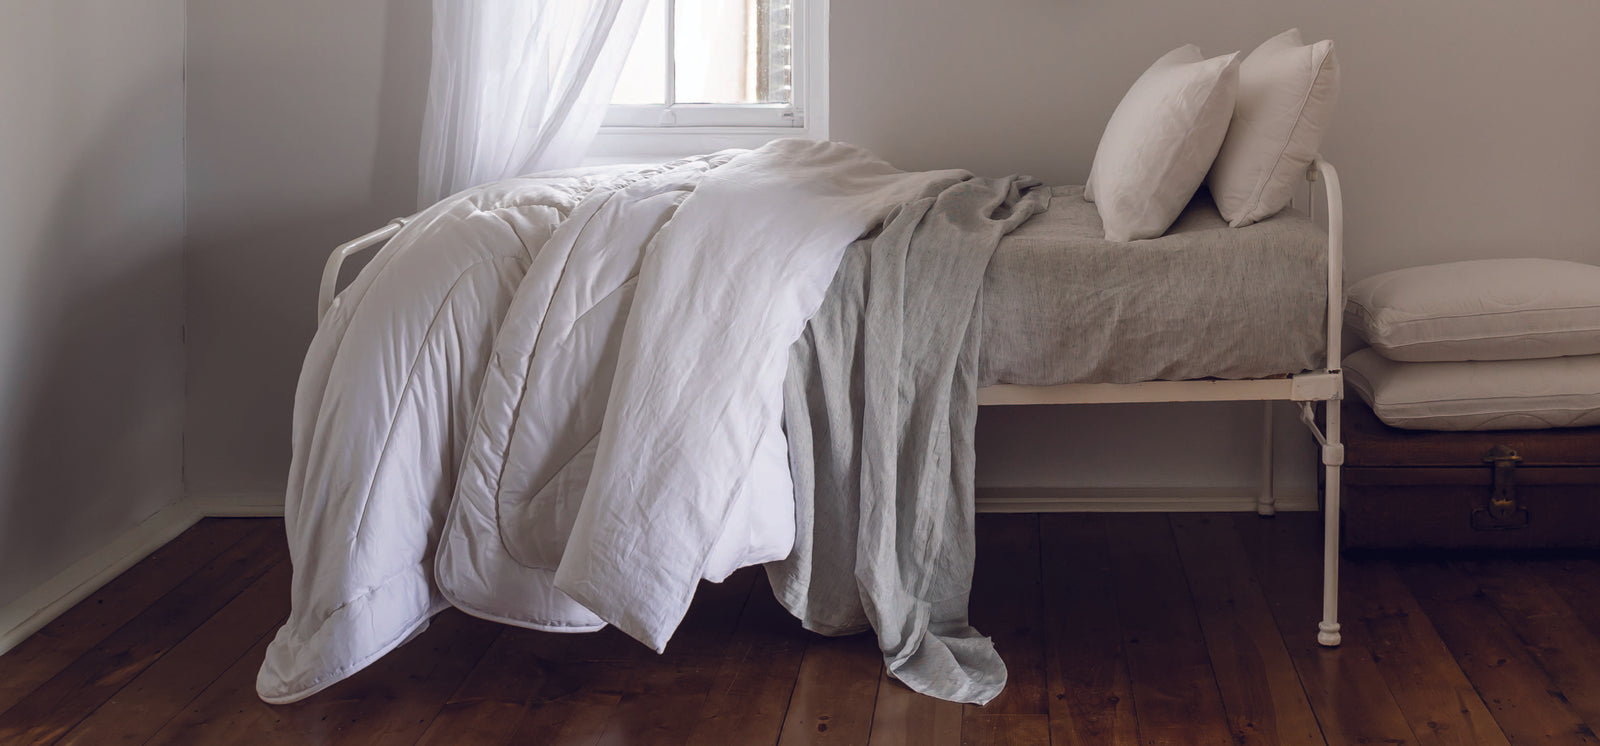 How To Have The Perfect Duvet Day